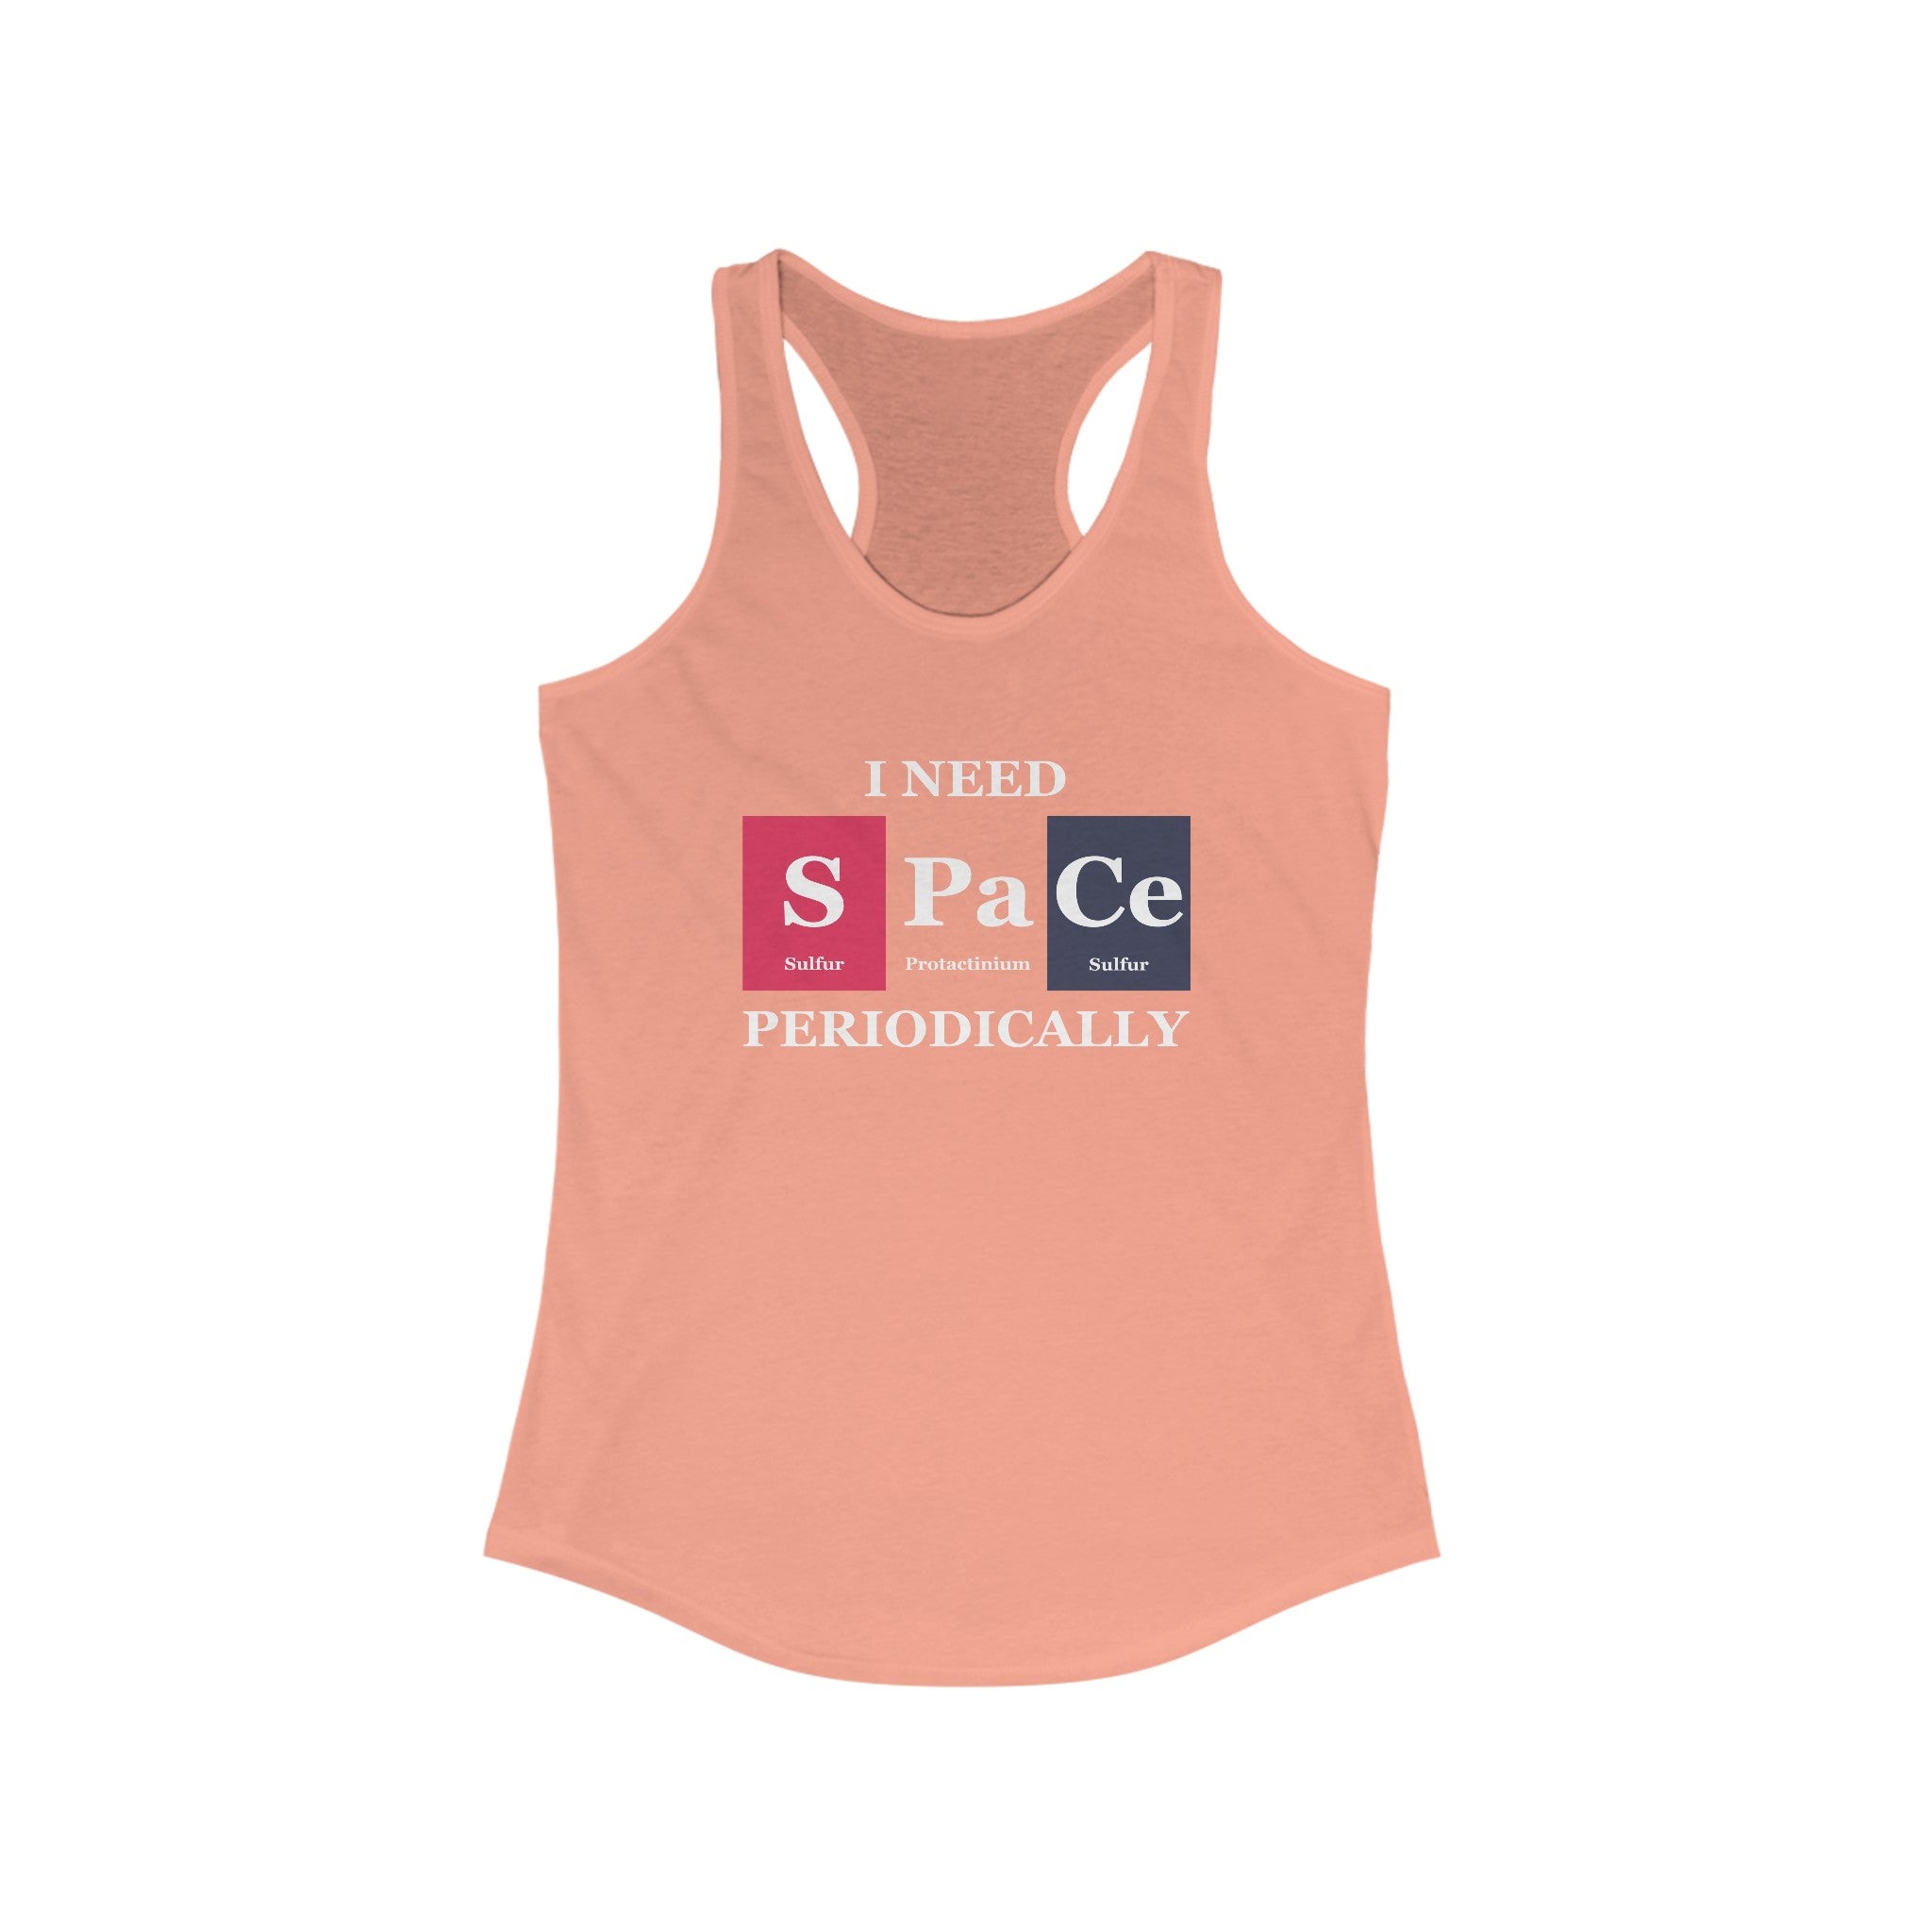 Fashion-forward peach-colored S-Pa-Ce - Women's Racerback Tank with the text "I need space periodically" cleverly using chemical elements: Sulfur (S), Phosphorus (P), Actinium (Ac), and Einsteinium (Es). This lightweight tank ensures both comfort and style.